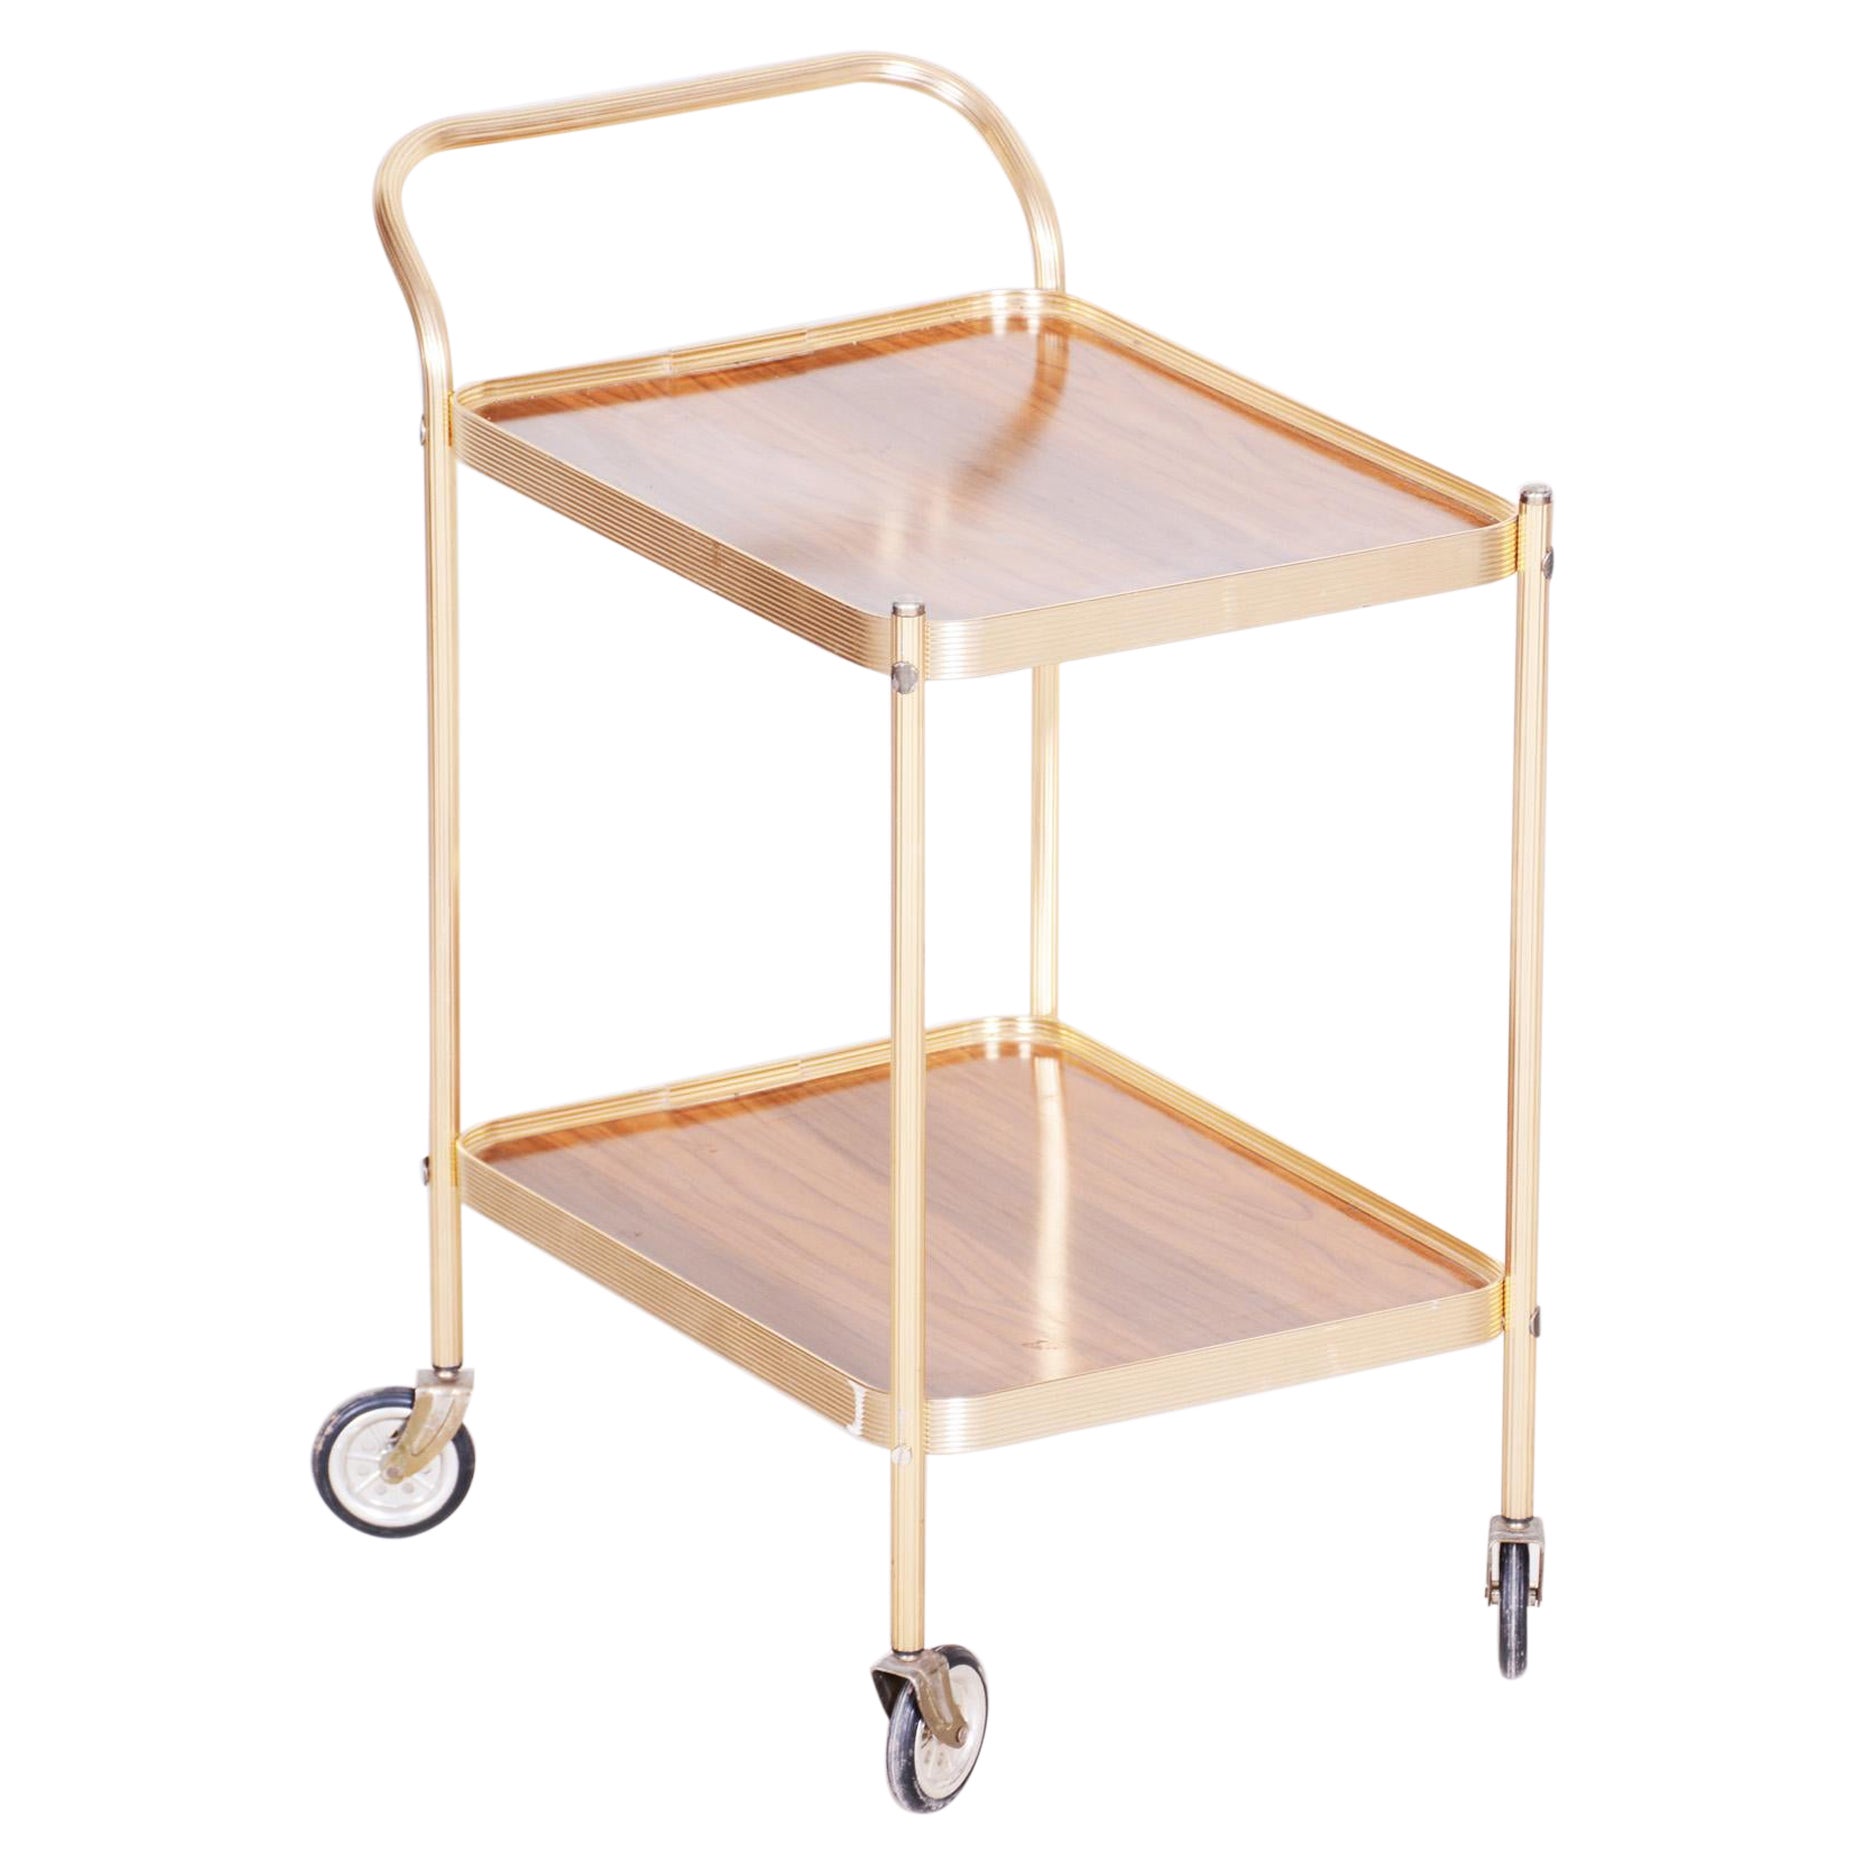 20th Century French Art Deco Trolley, Made Out of Brass Original Condition 1950s For Sale